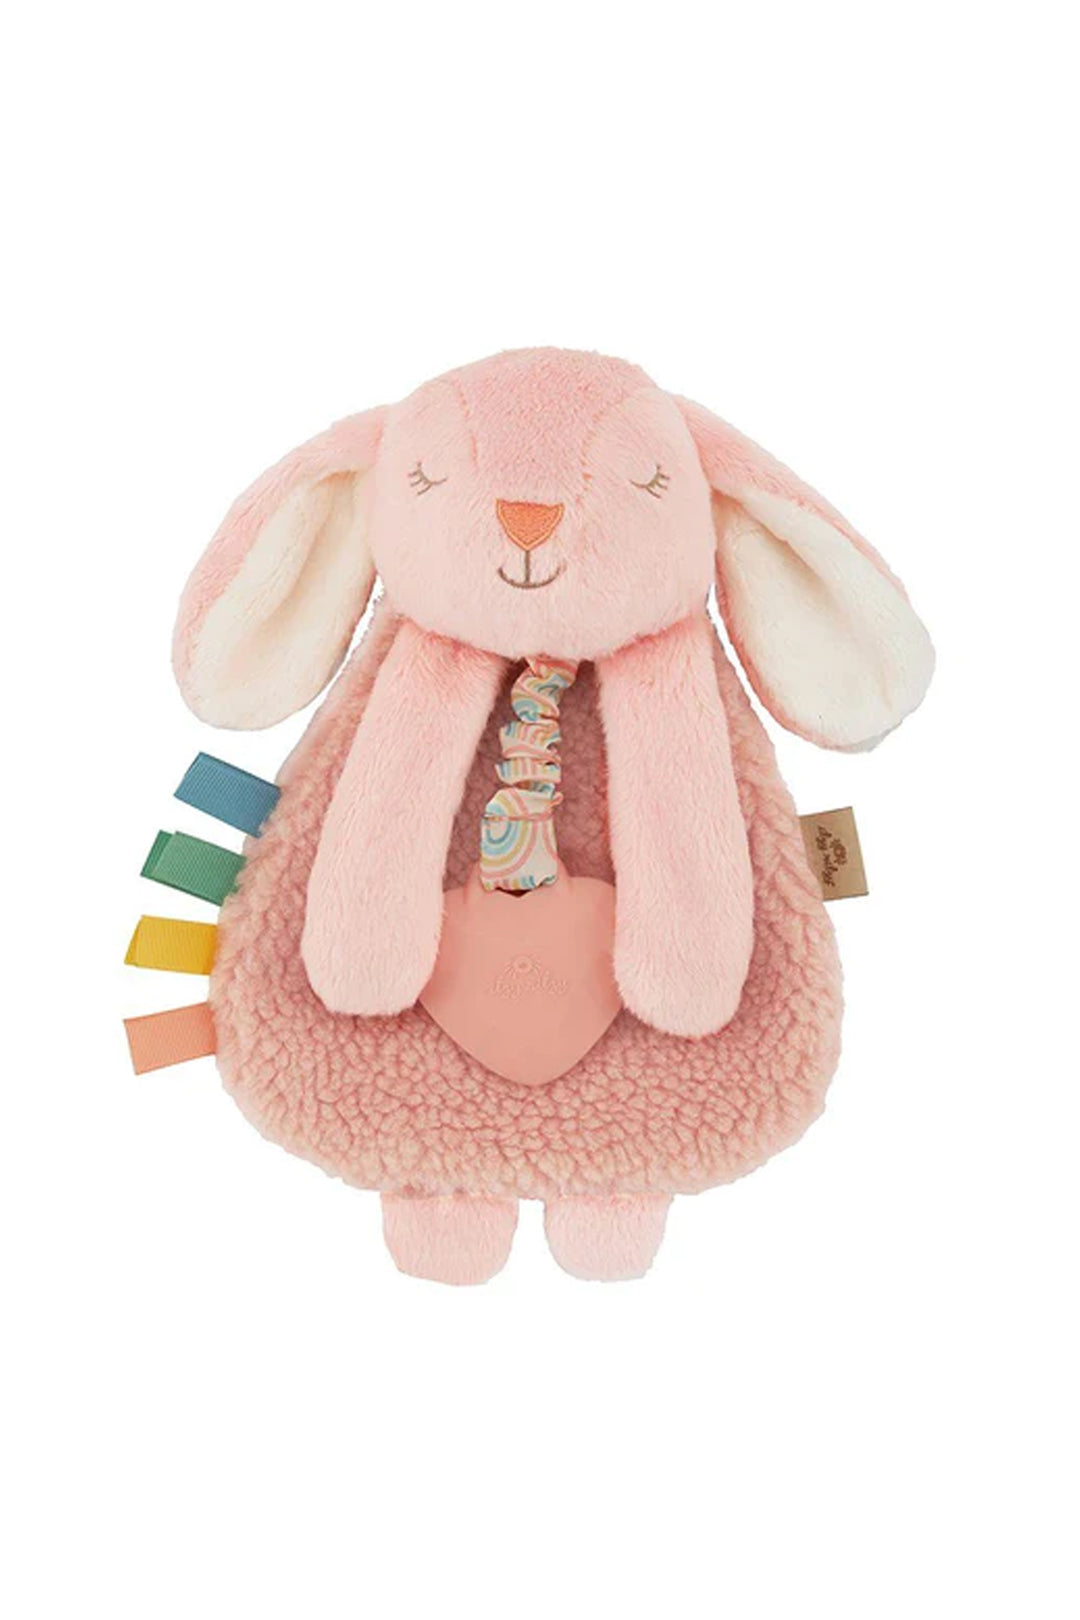 Teether toy - Ana the Bunny